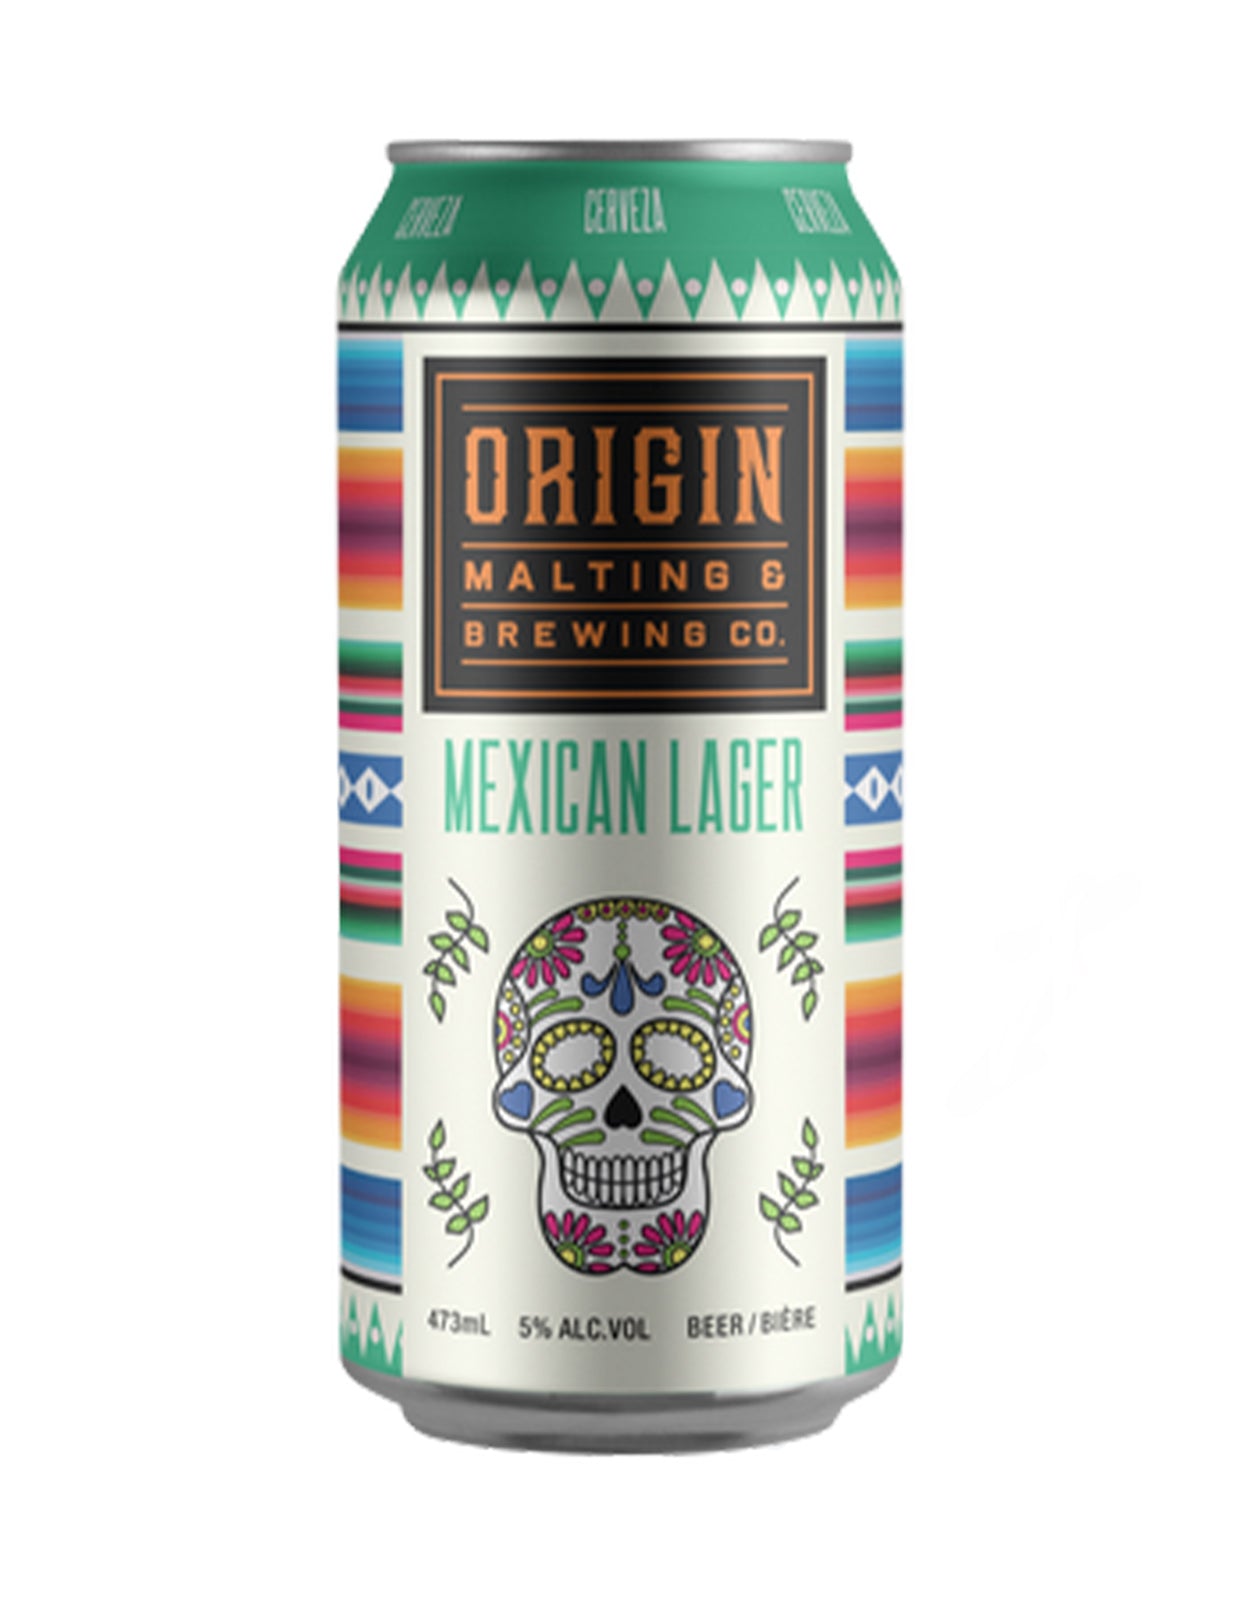 Origin Malting & Brewing Mexican Lager 473 ml - 4 Cans